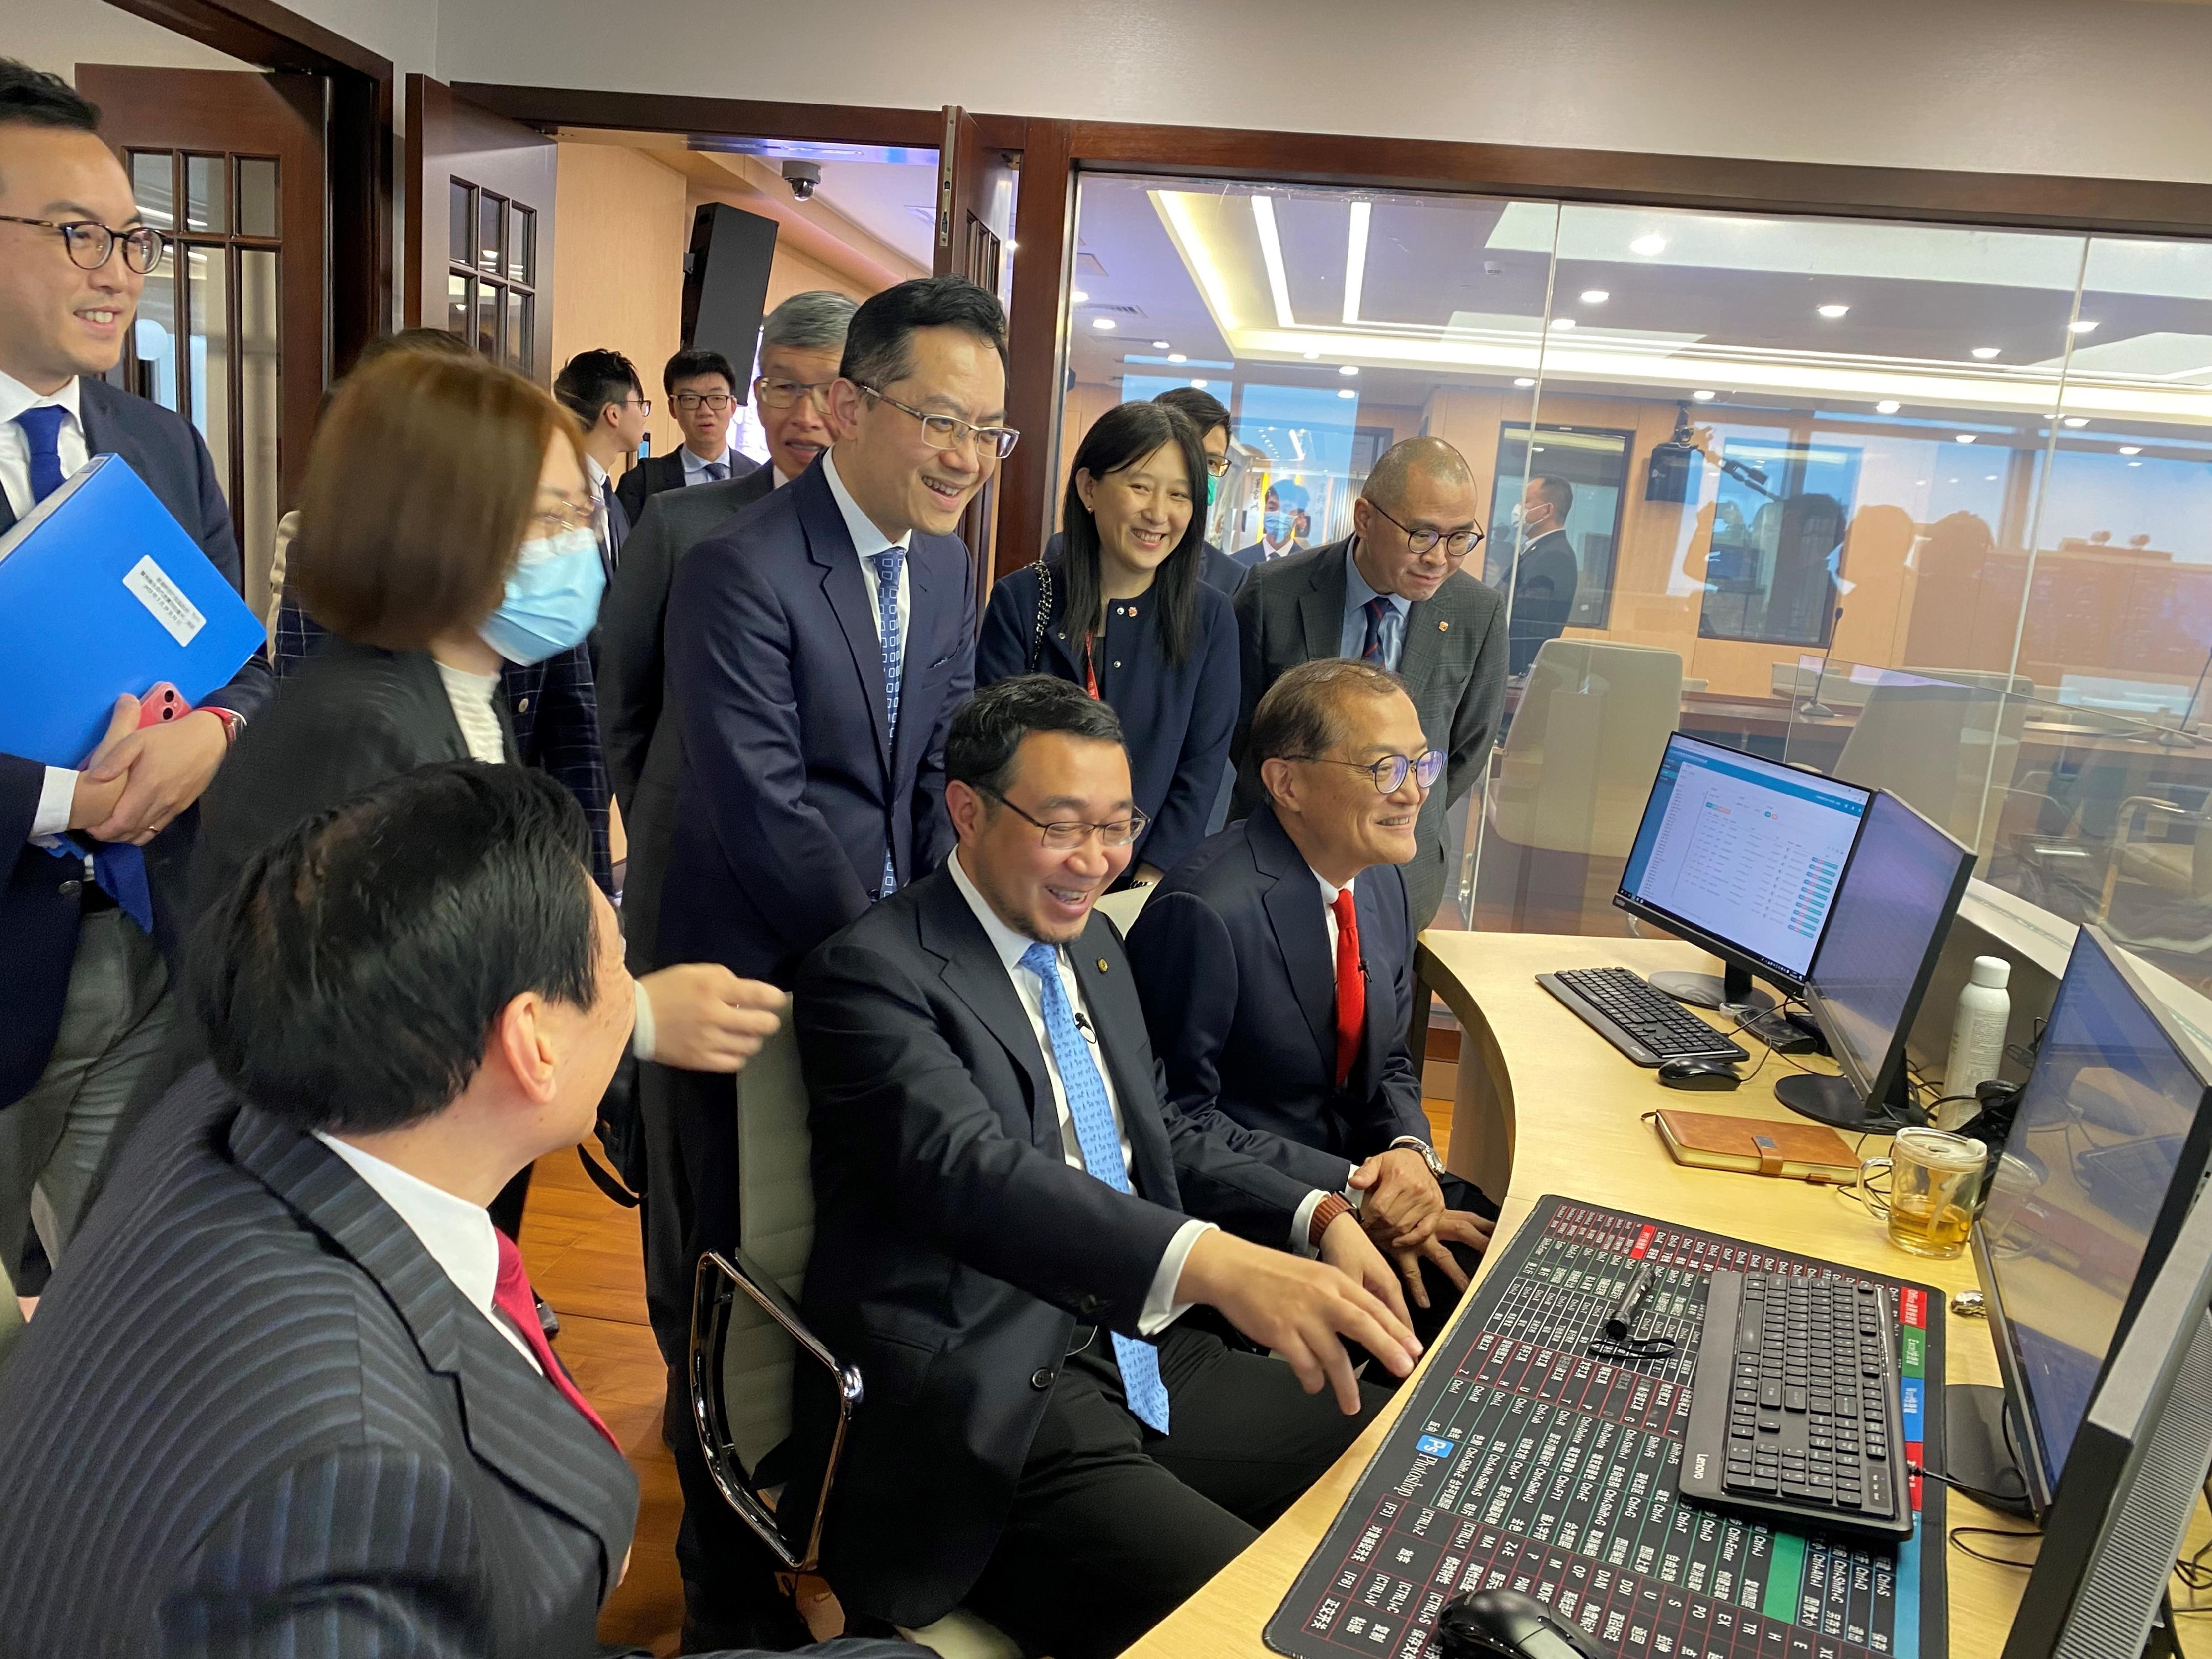 The Secretary for Health, Professor Lo Chung-mau, led his delegation to visit the Big Data Centre of National Health Commission for Human Tissue, Organ Transplant and Medicine. Photo shows Professor Lo (front row, first right), and the Director of Health, Dr Ronald Lam (back row, third left), learning about the operation of the nation's organ allocation mechanism from the Centre's Director, Professor Wang Haibo (front row, second right).